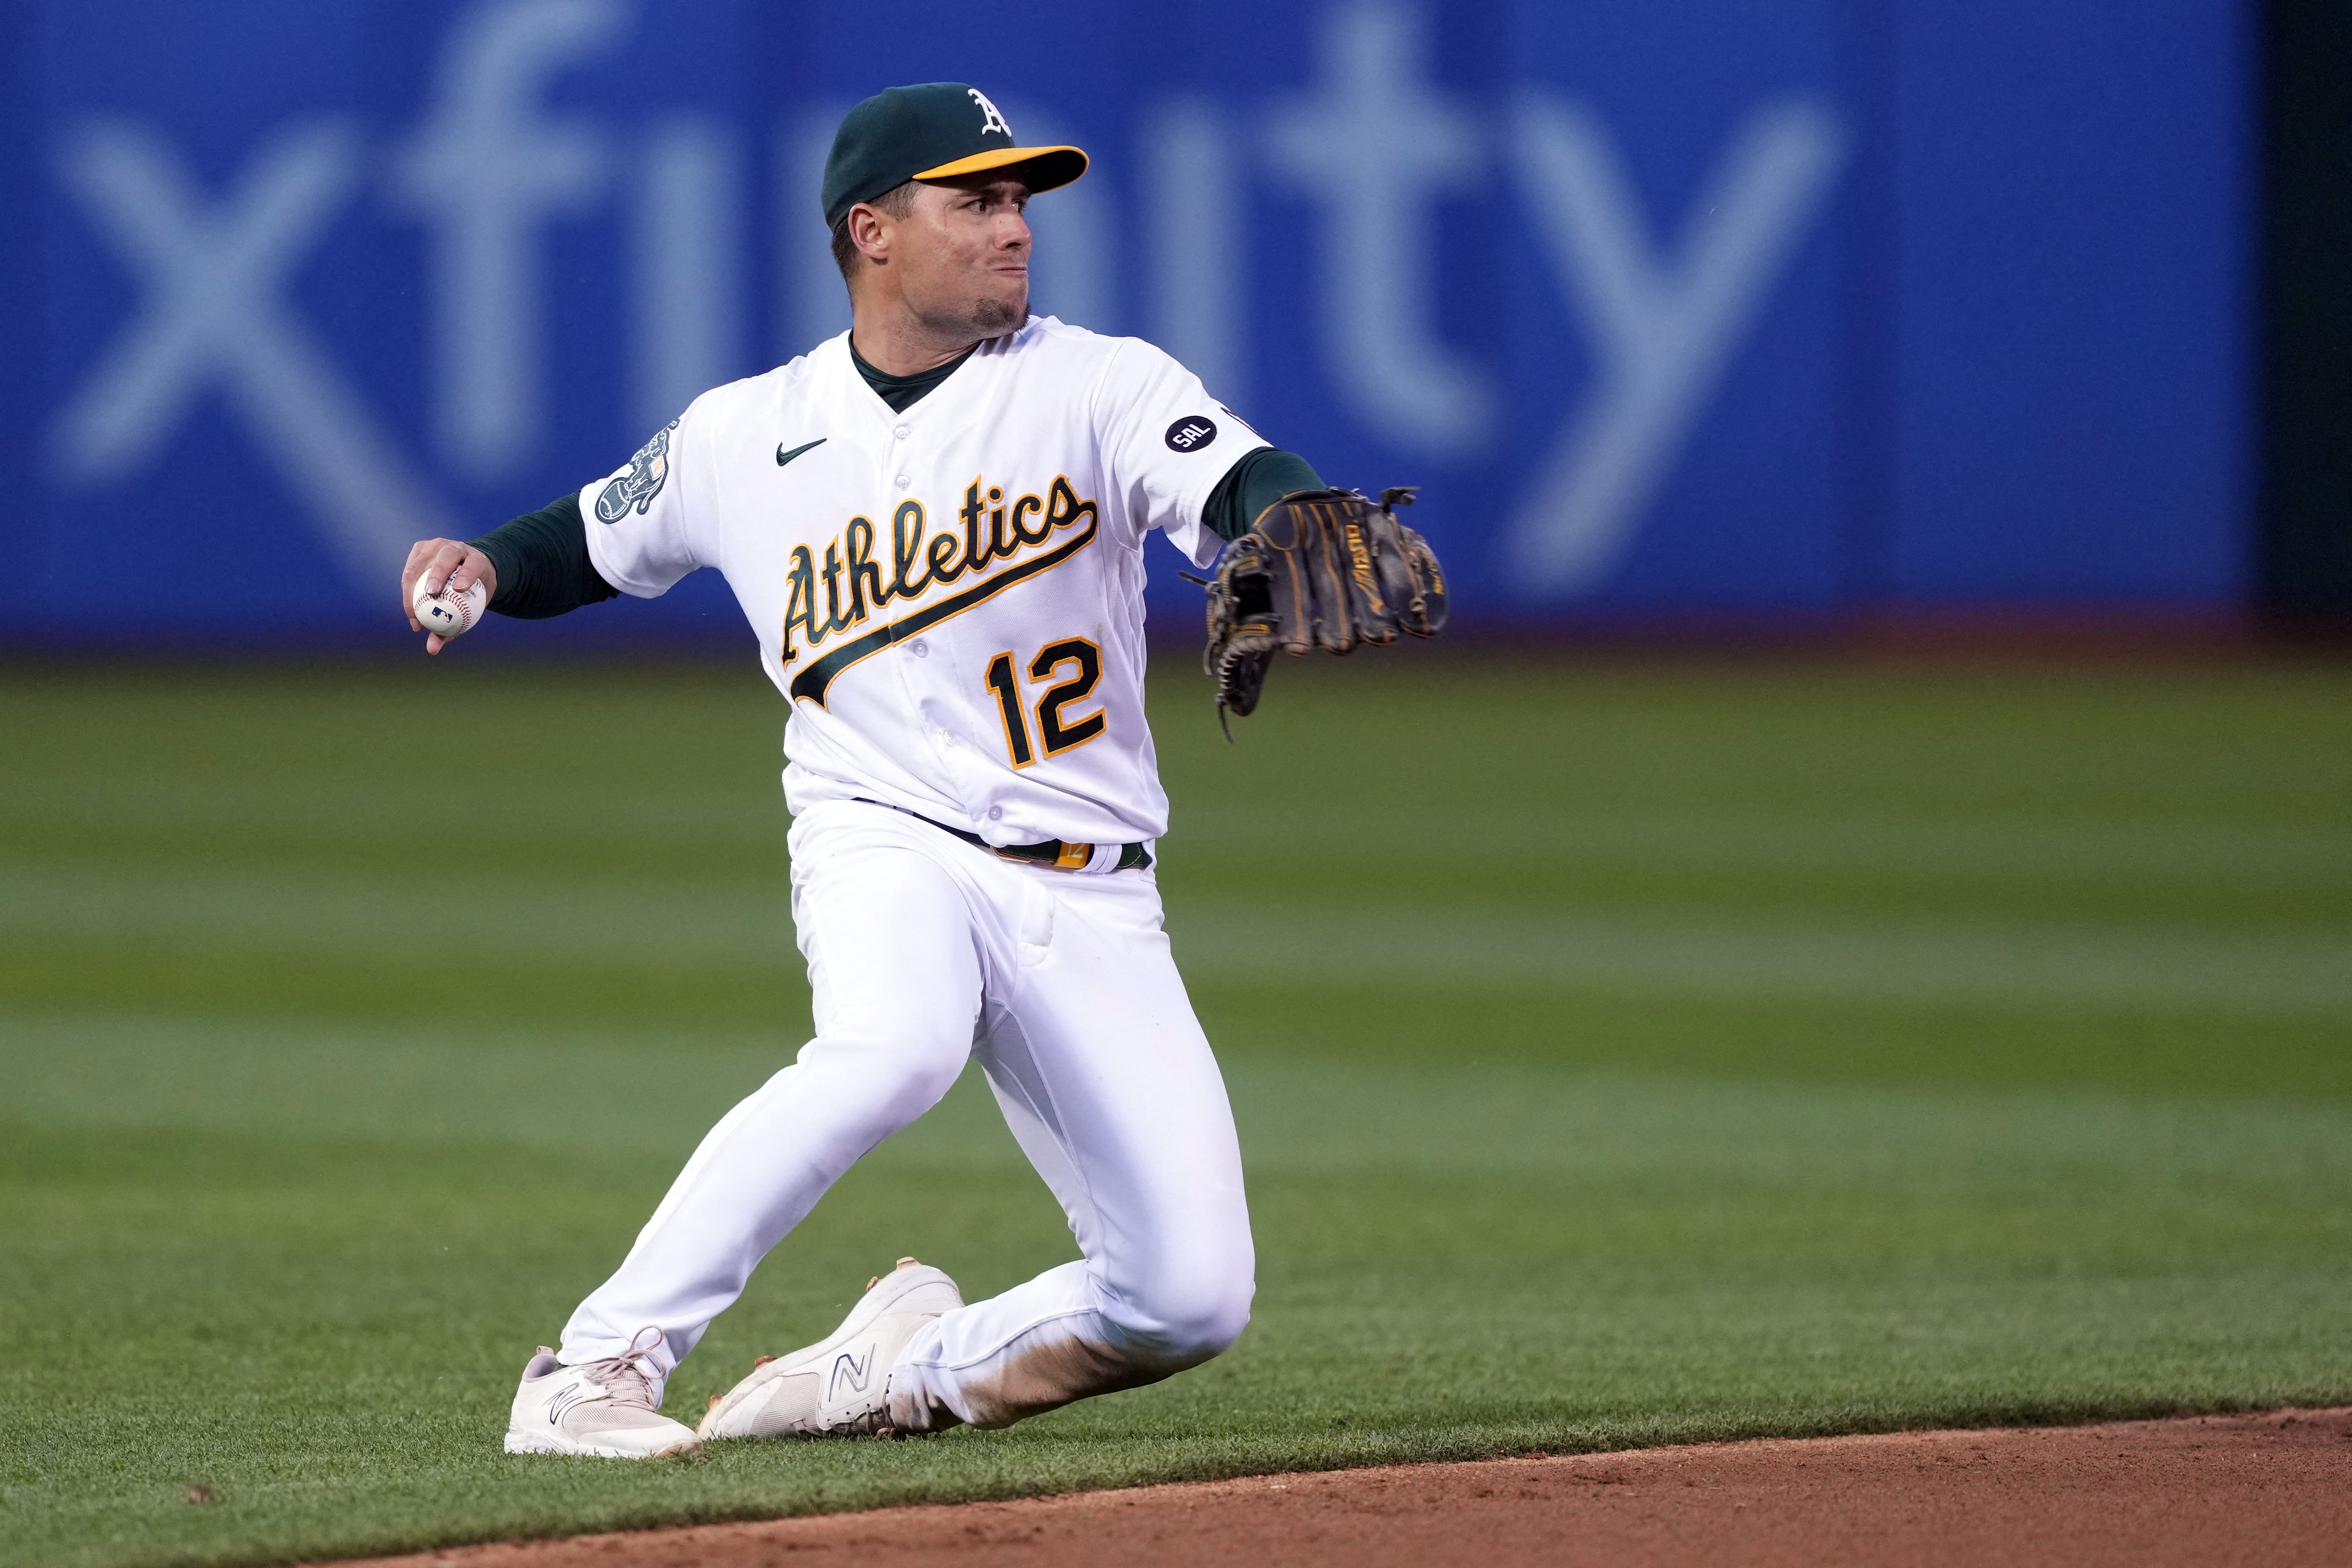 A's pitcher Liam Hendriks might lead MLB in books read